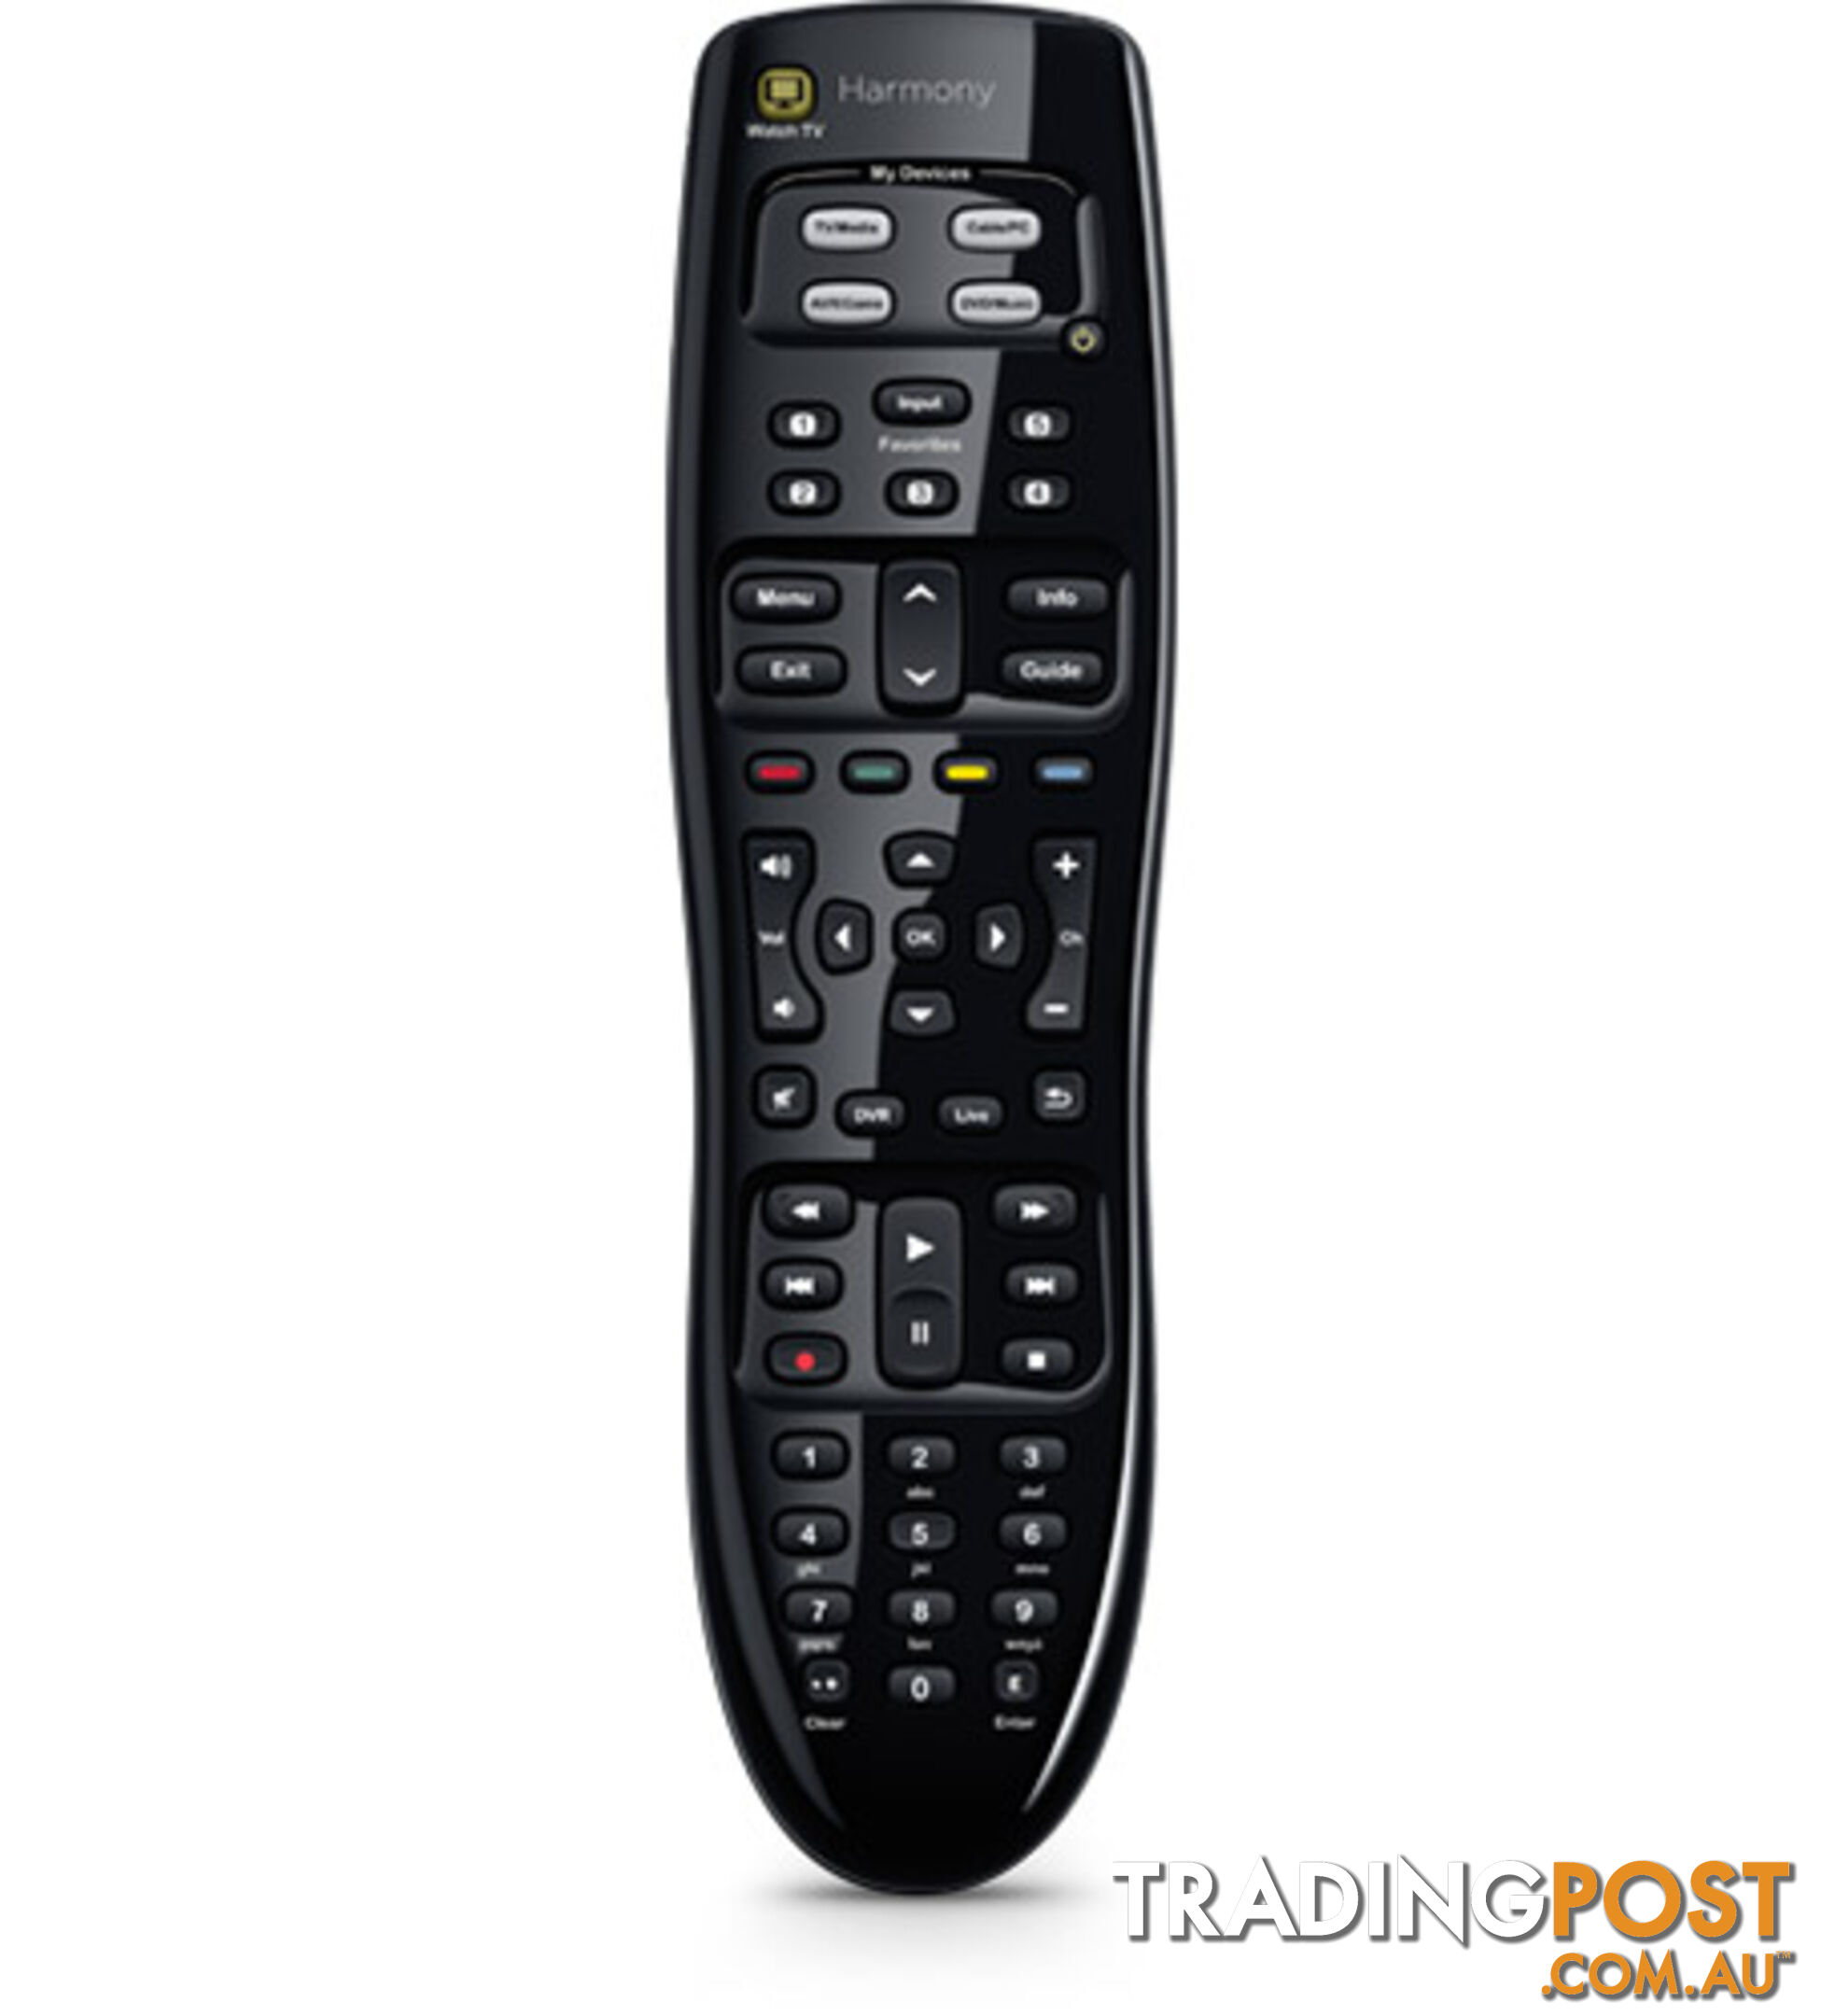 Logitech Harmony 350 Remote Universal Remote Control Most compatible One-touch entertainment 5 channel presets - MILT-HARMONY350